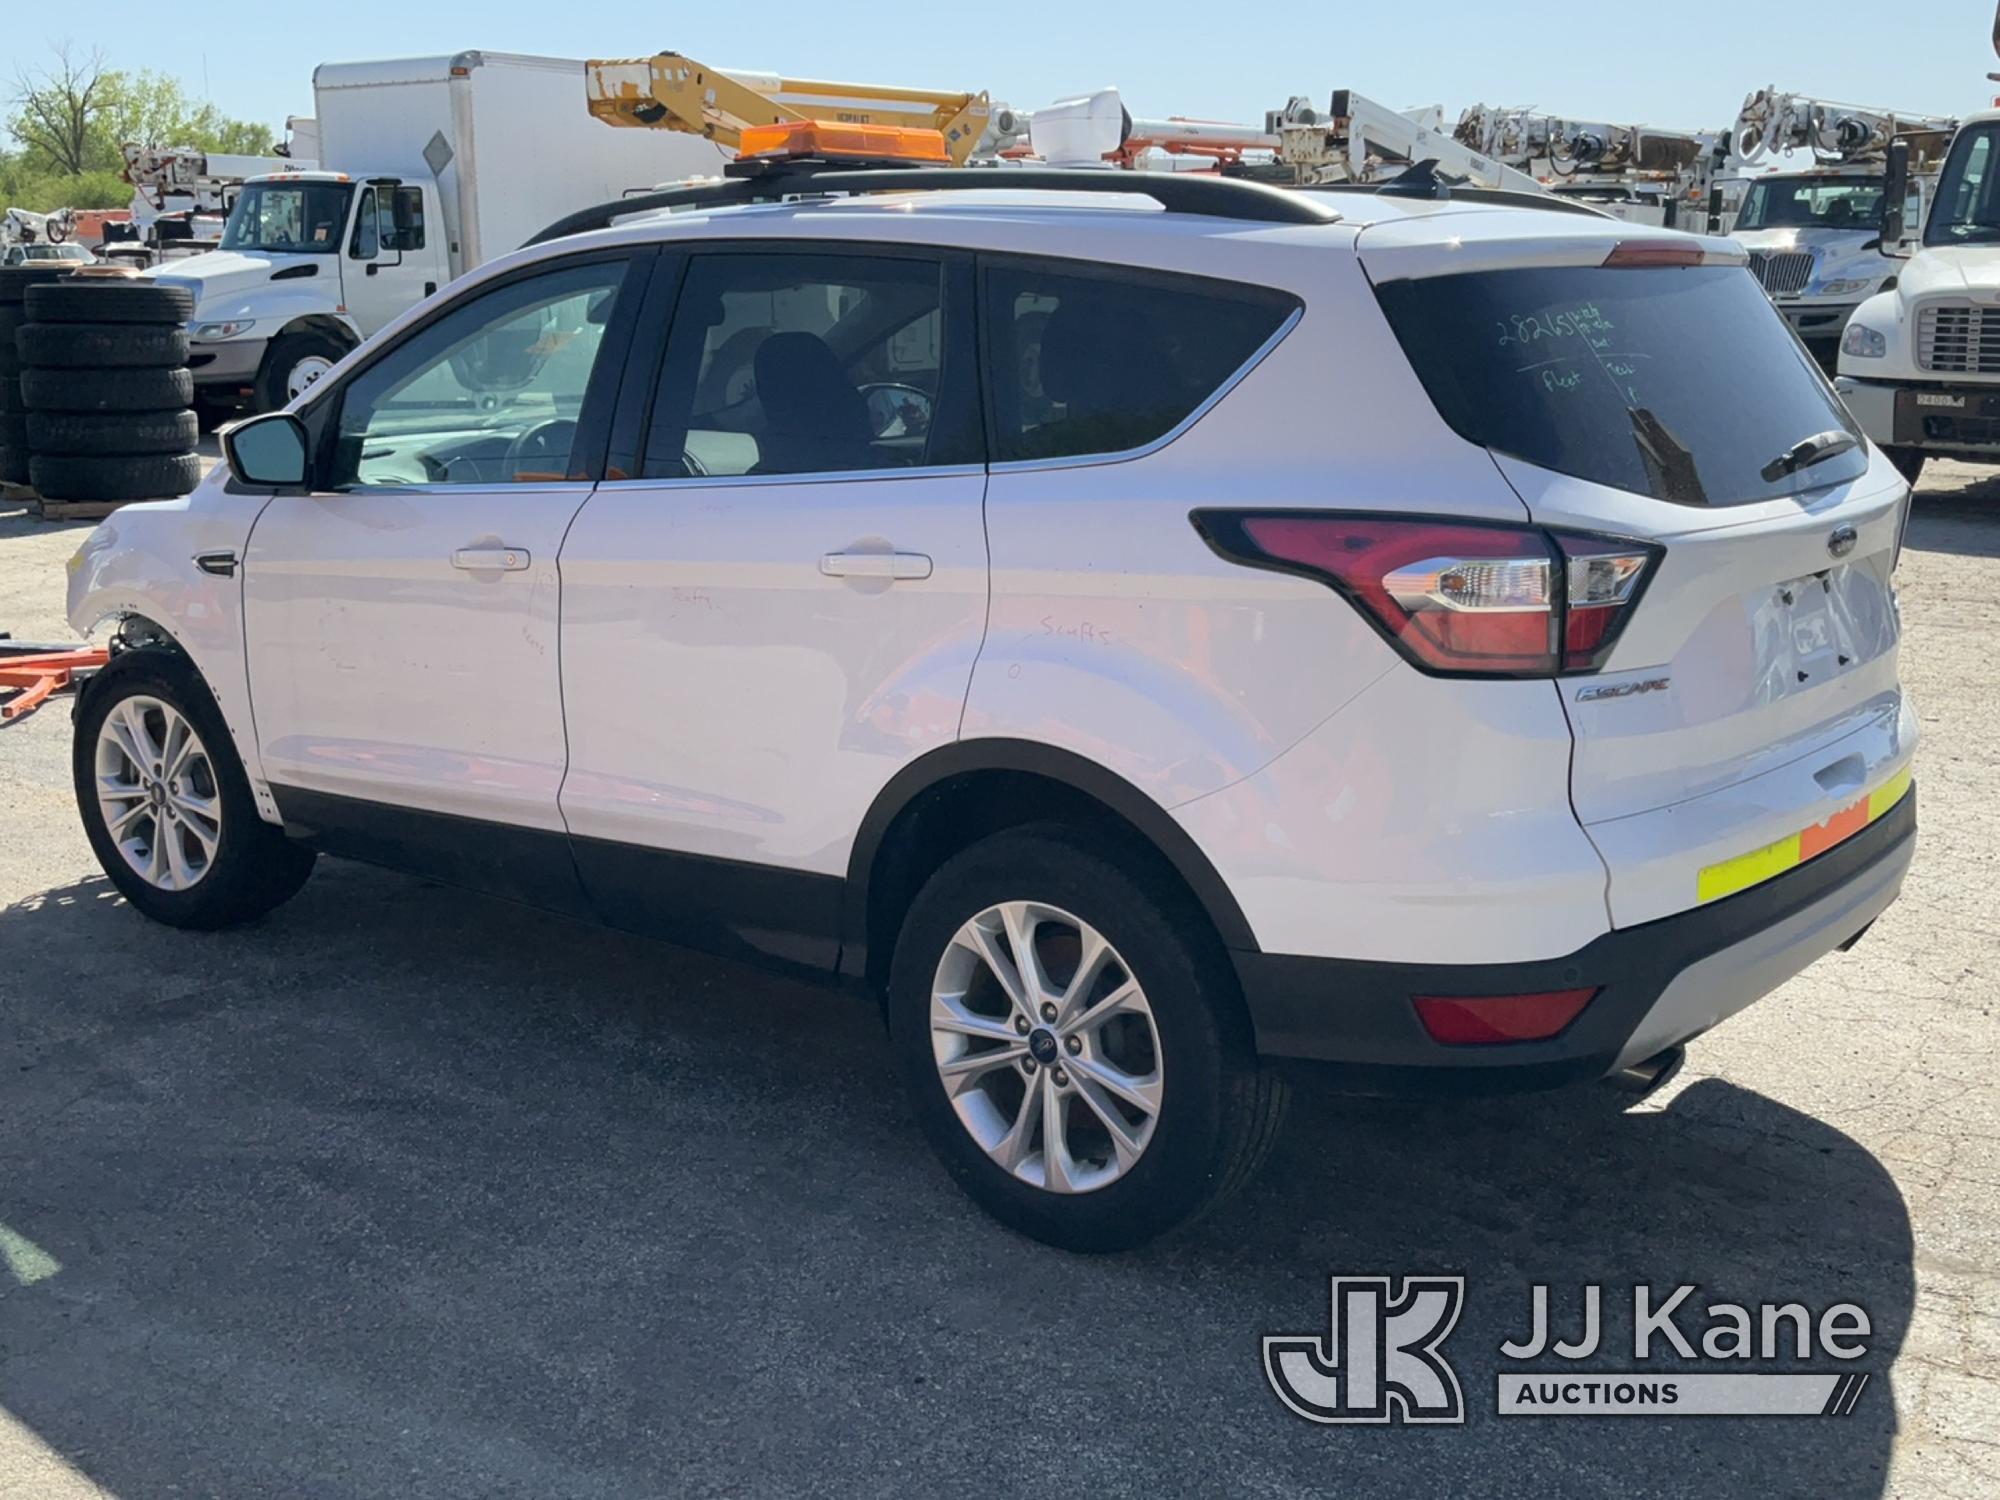 (South Beloit, IL) 2018 Ford Escape 4x4 4-Door Sport Utility Vehicle Wrecked-Condition Unknown-Missi